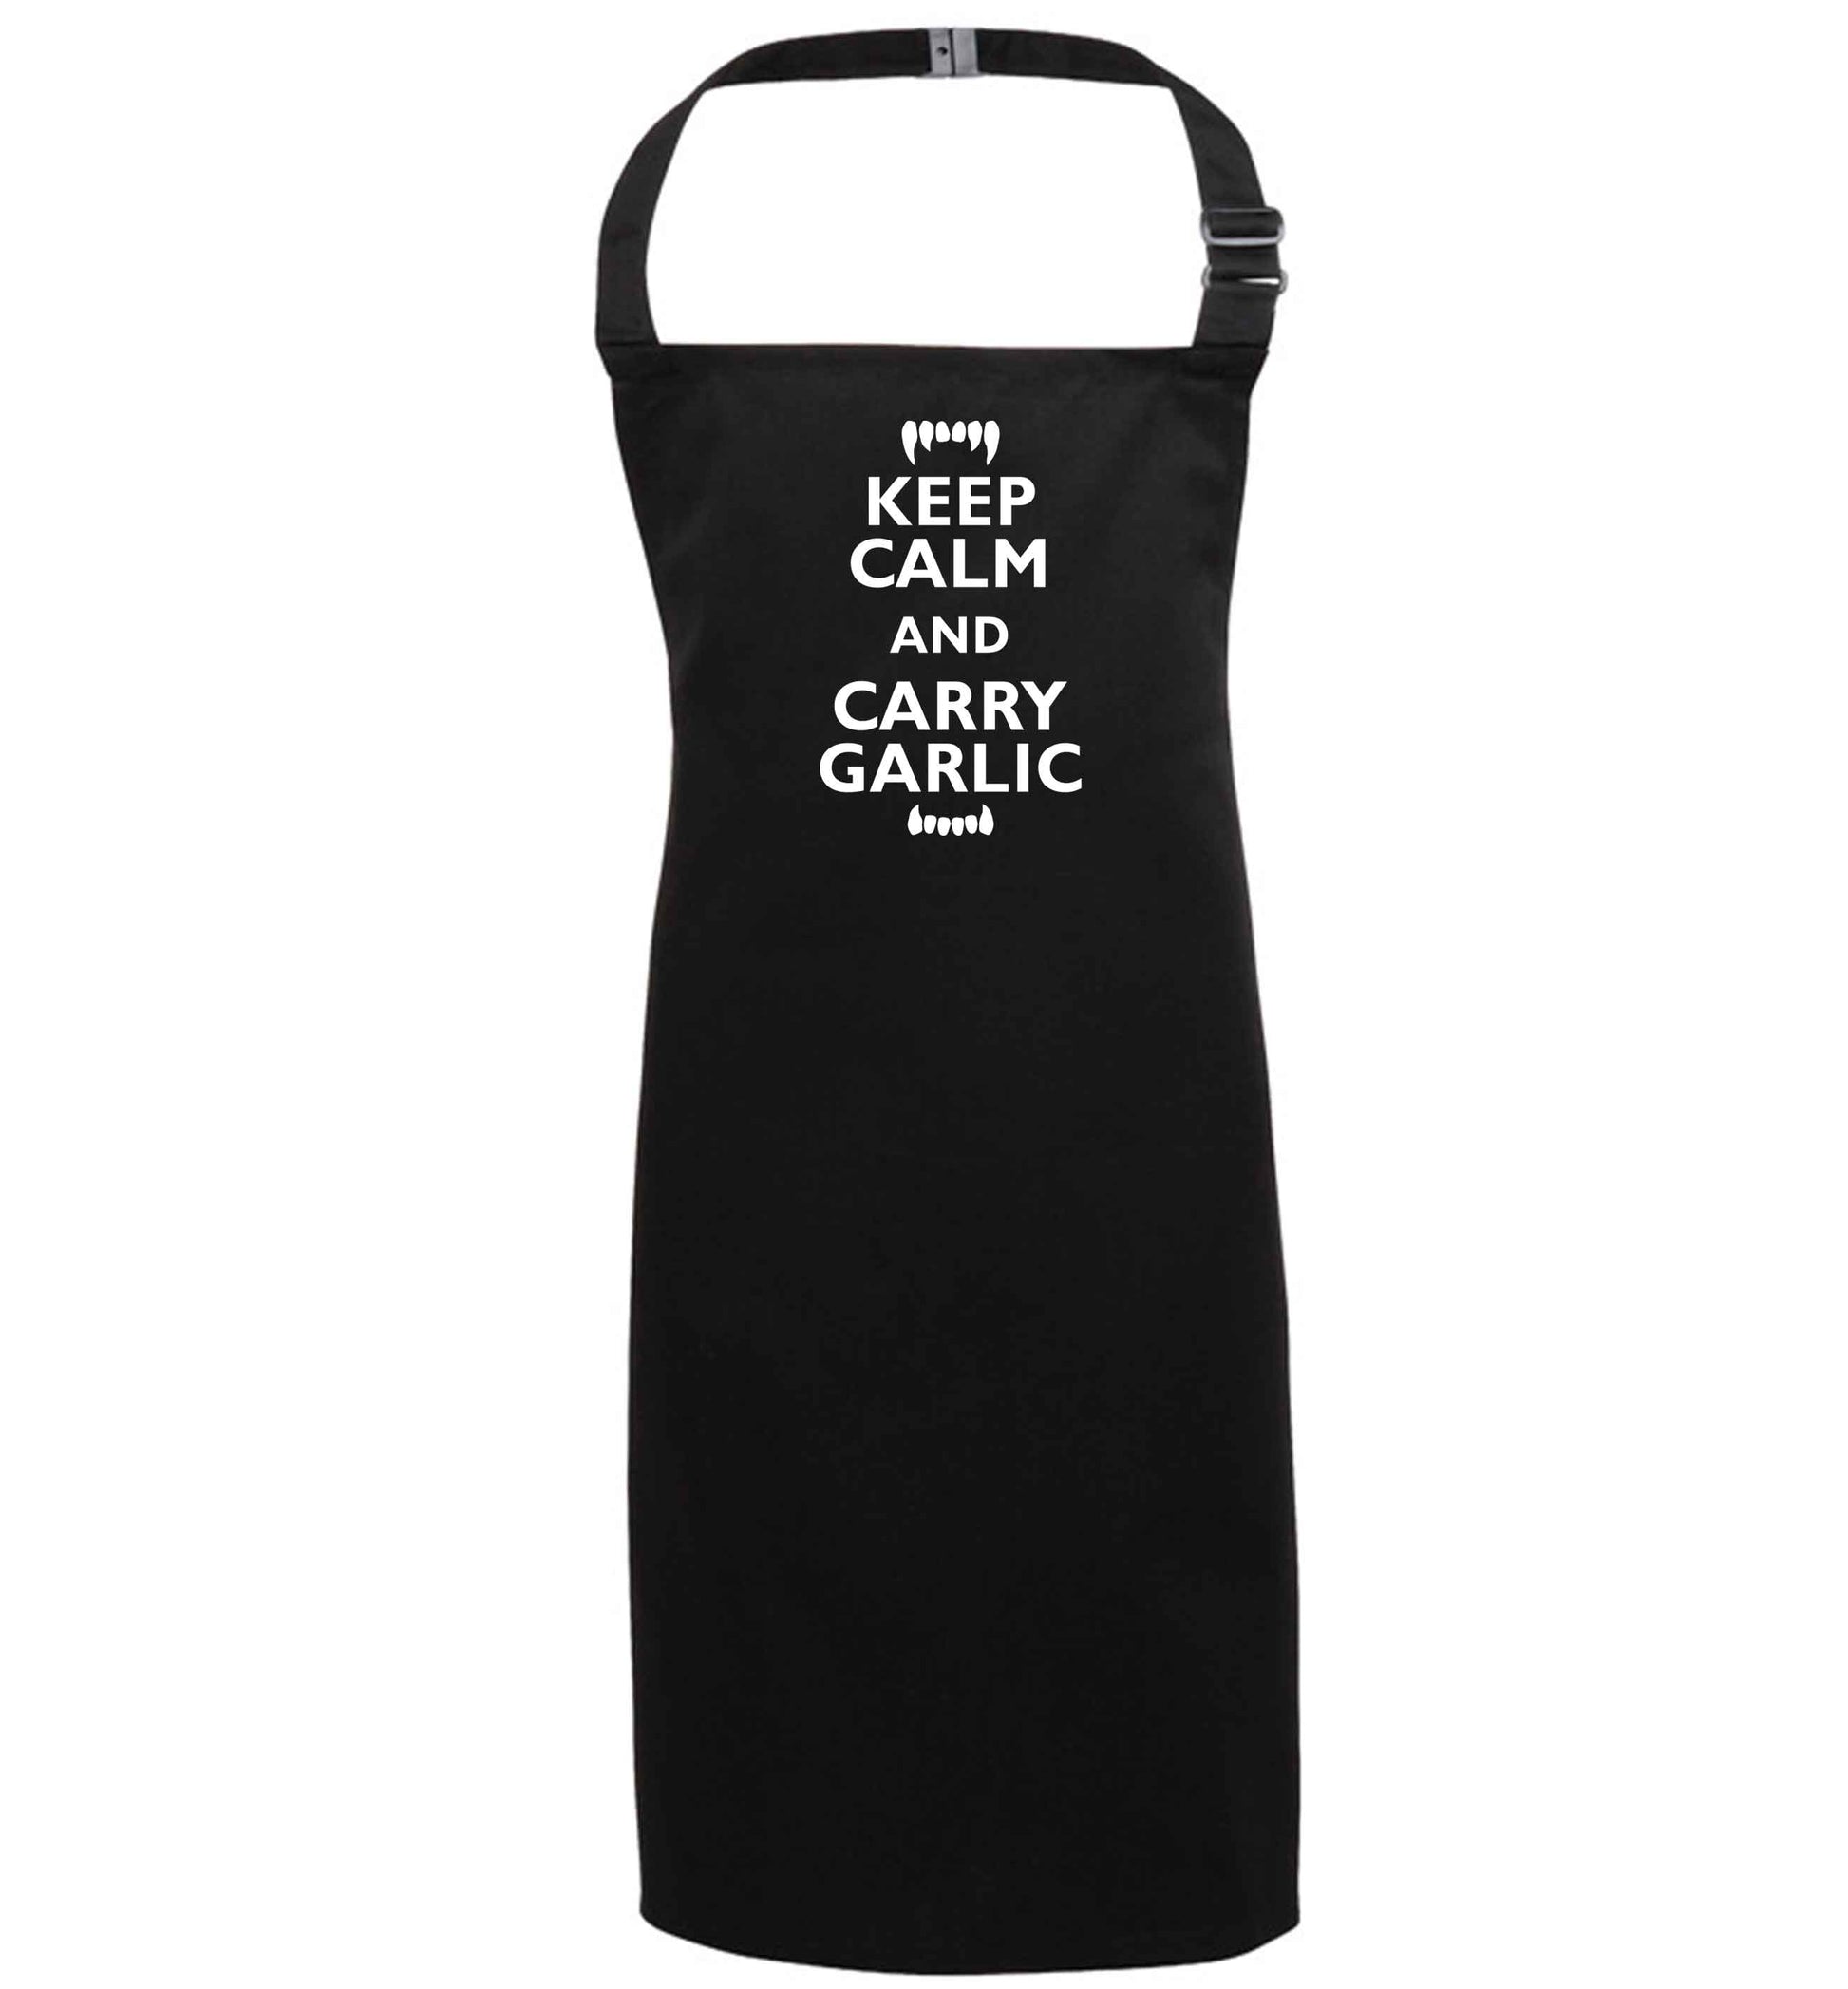 Keep calm and carry garlic black apron 7-10 years